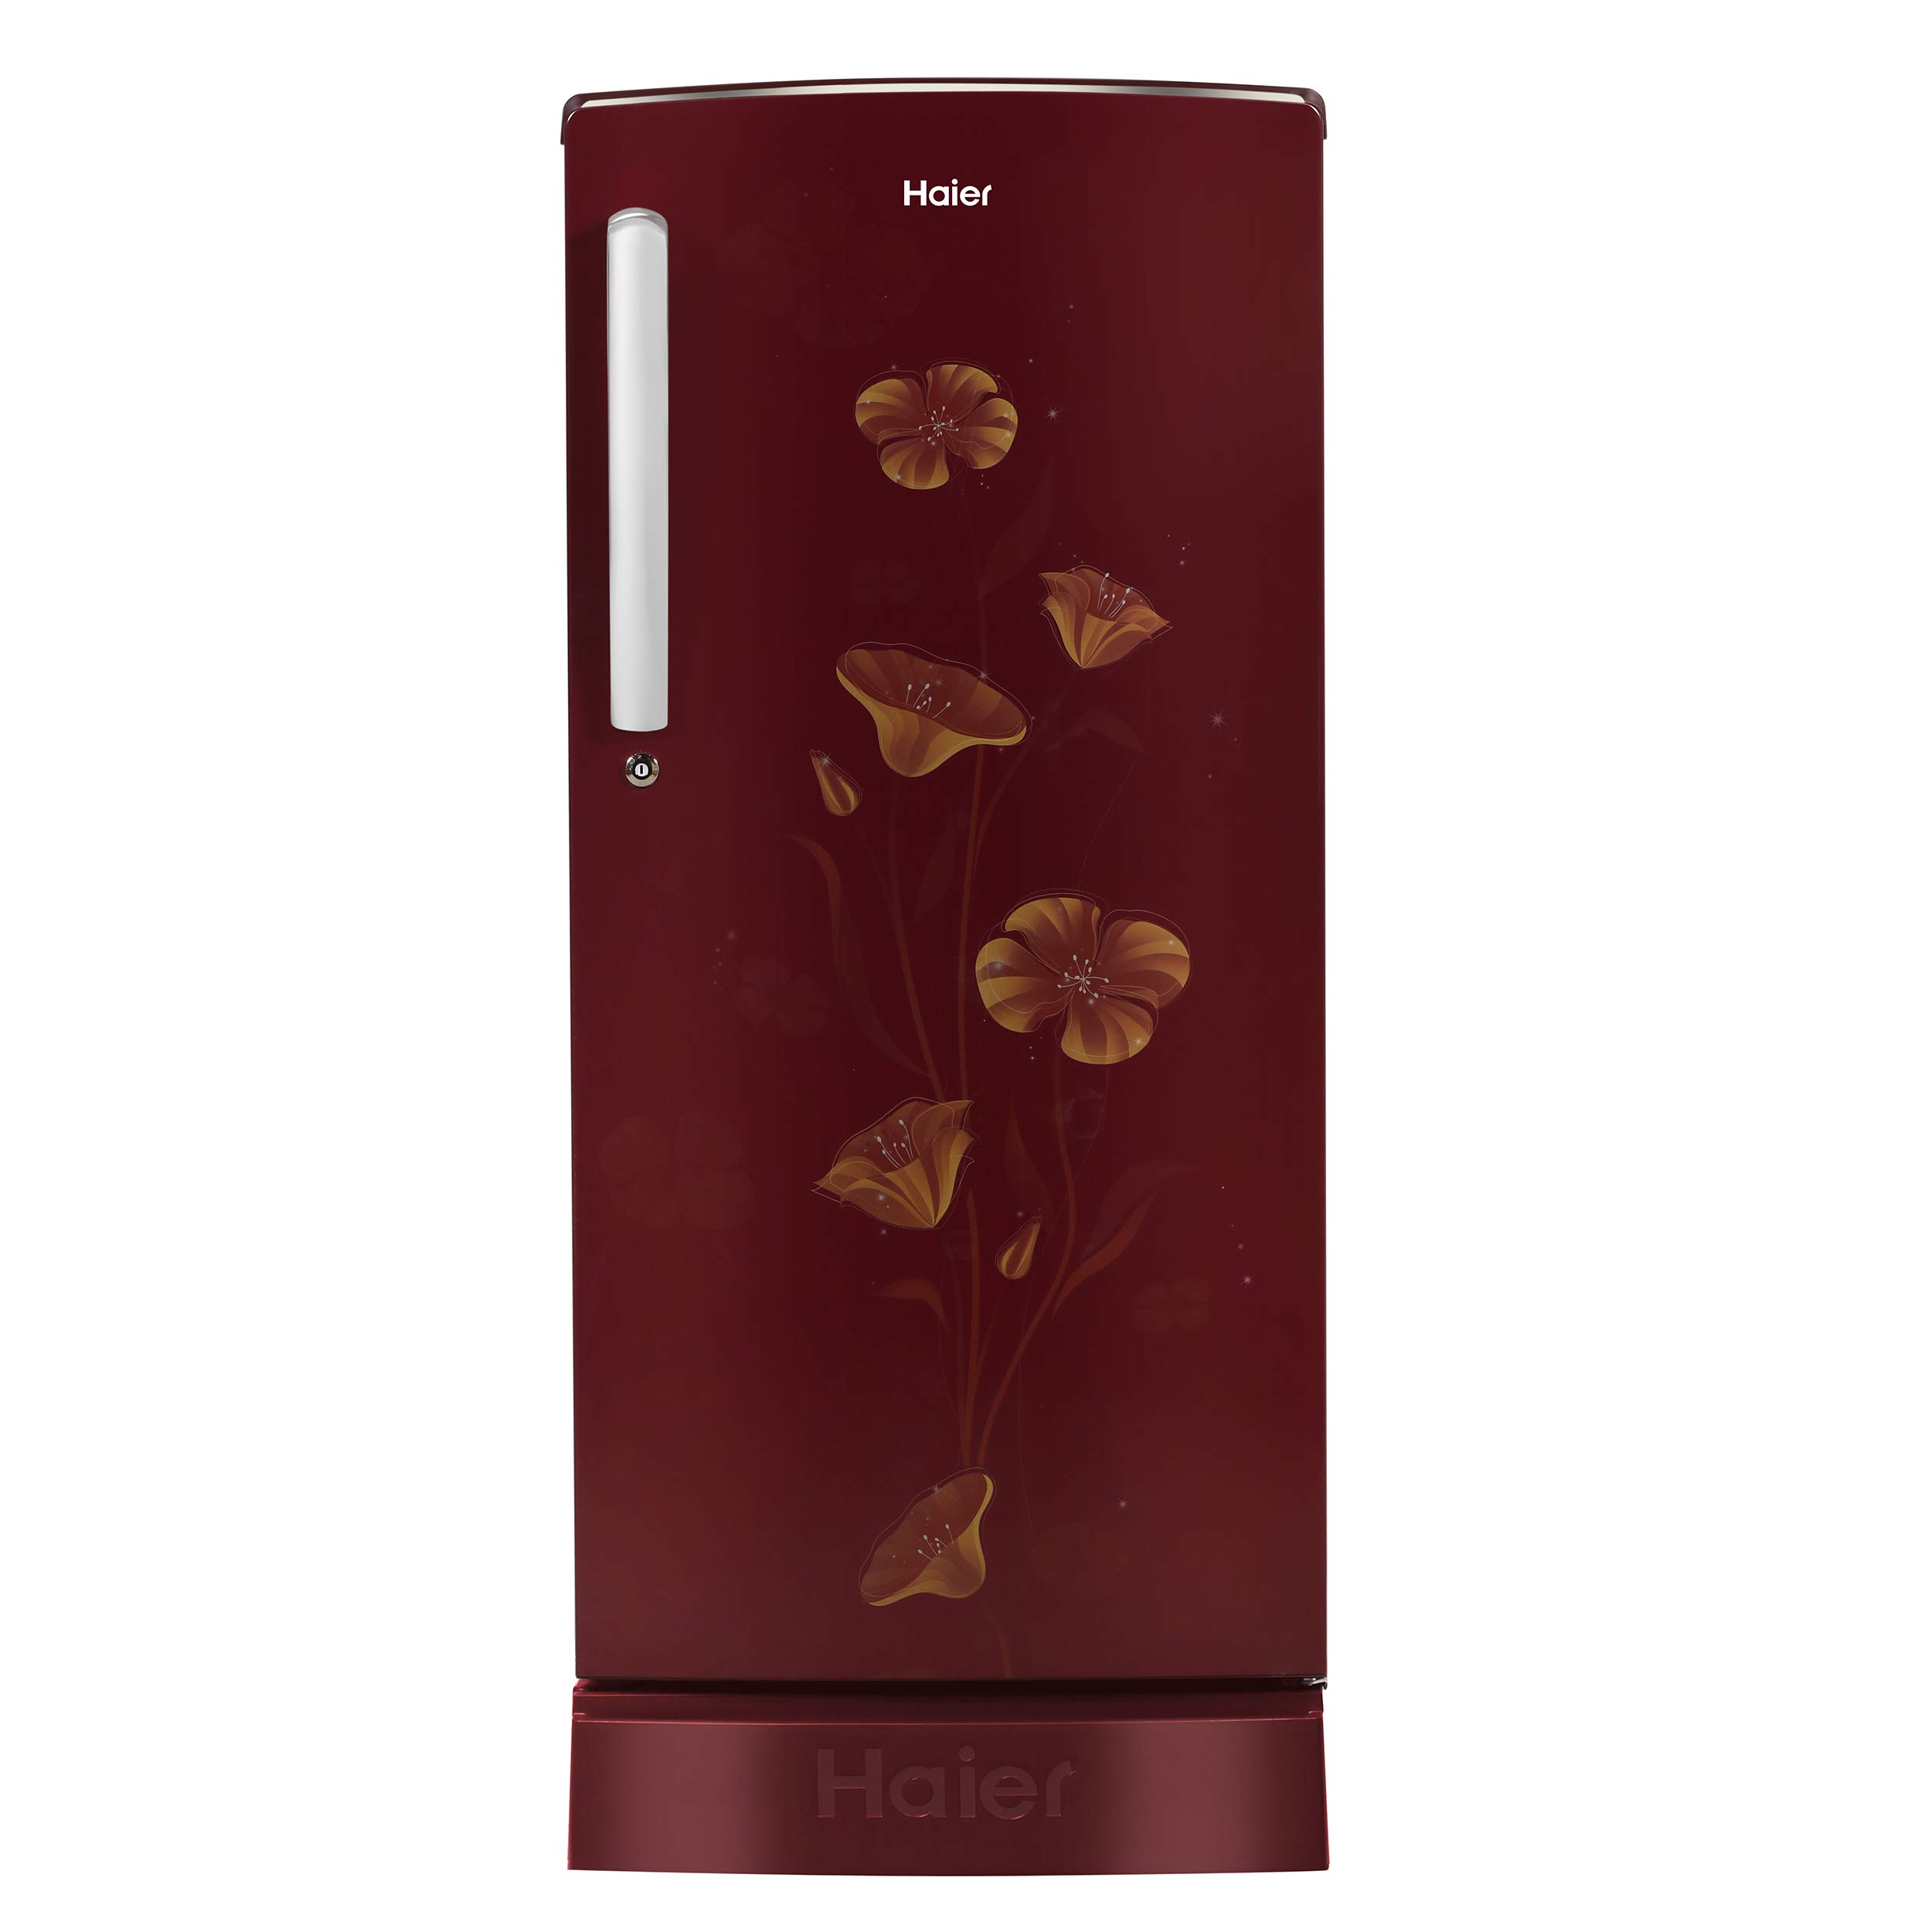 Haier 192 L 2Star Direct-Cool Single Door Refrigerator (HED 